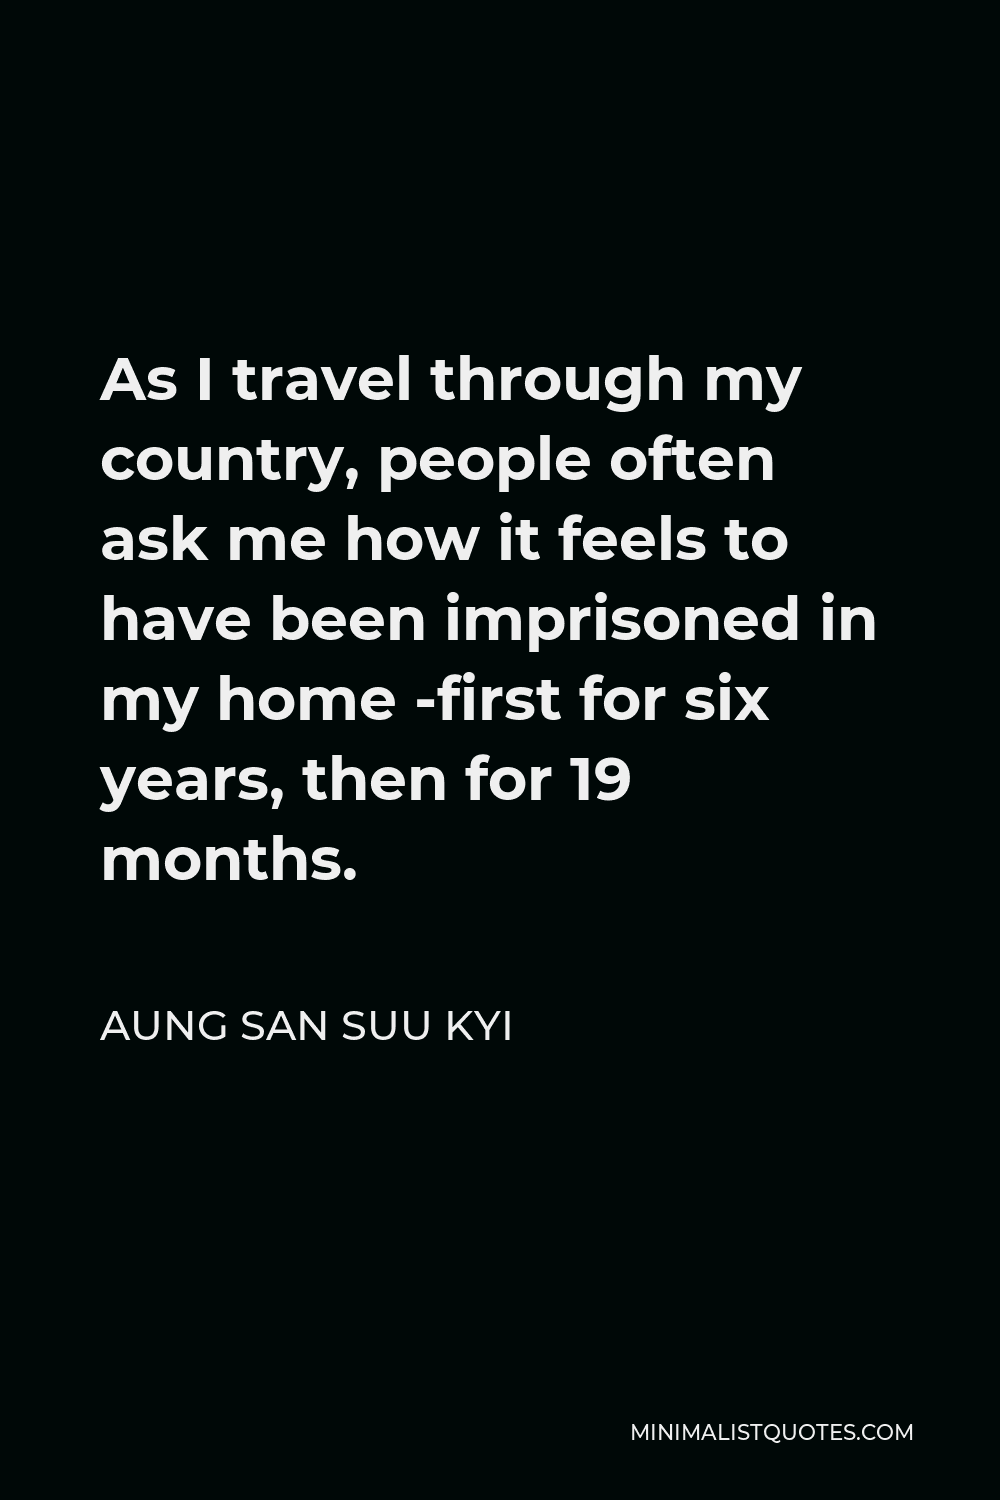 Aung San Suu Kyi Quote - As I travel through my country, people often ask me how it feels to have been imprisoned in my home -first for six years, then for 19 months.